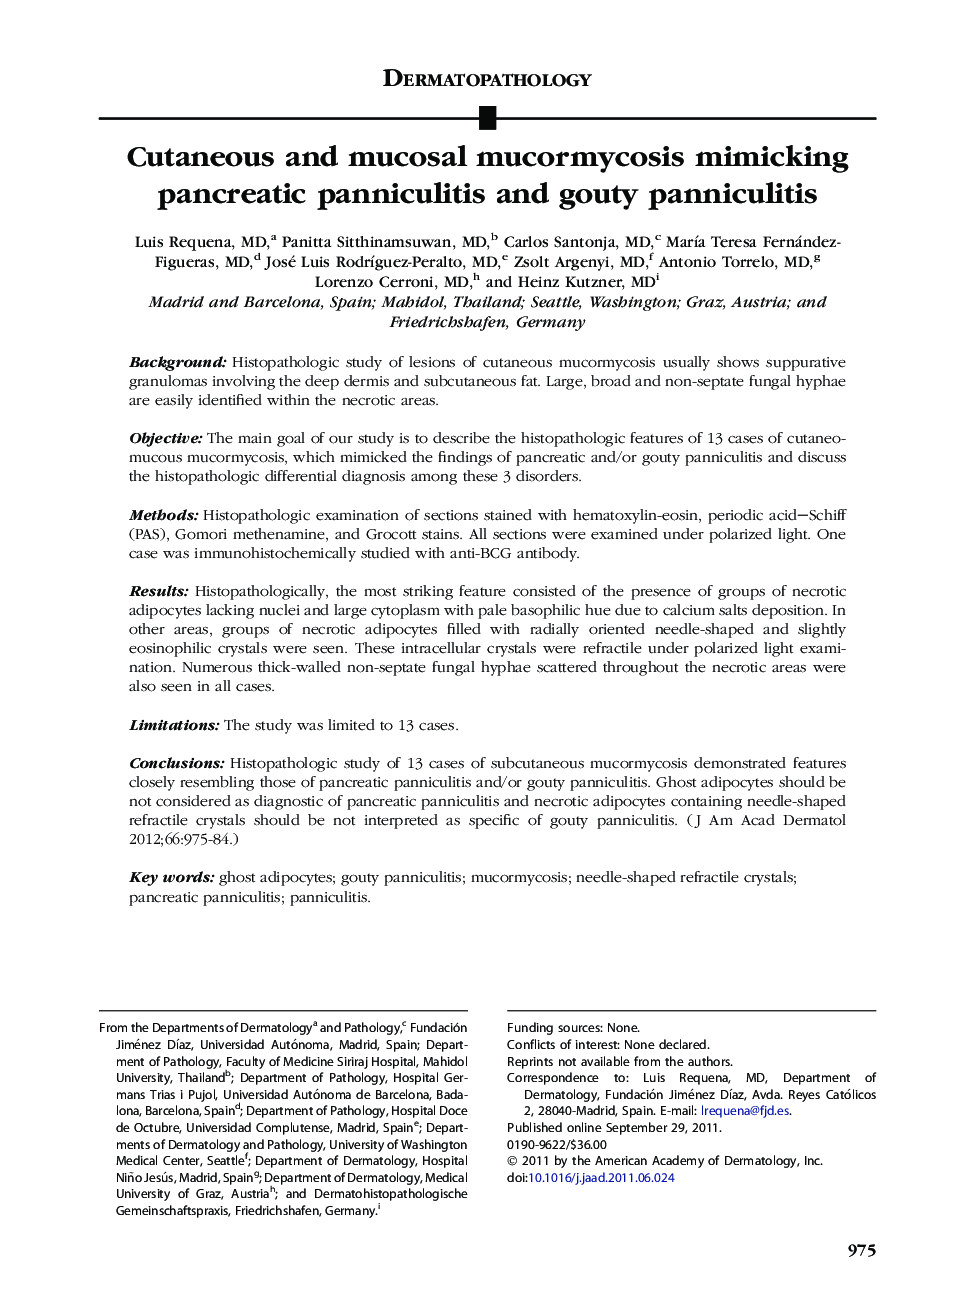 Cutaneous and mucosal mucormycosis mimicking pancreatic panniculitis and gouty panniculitis 